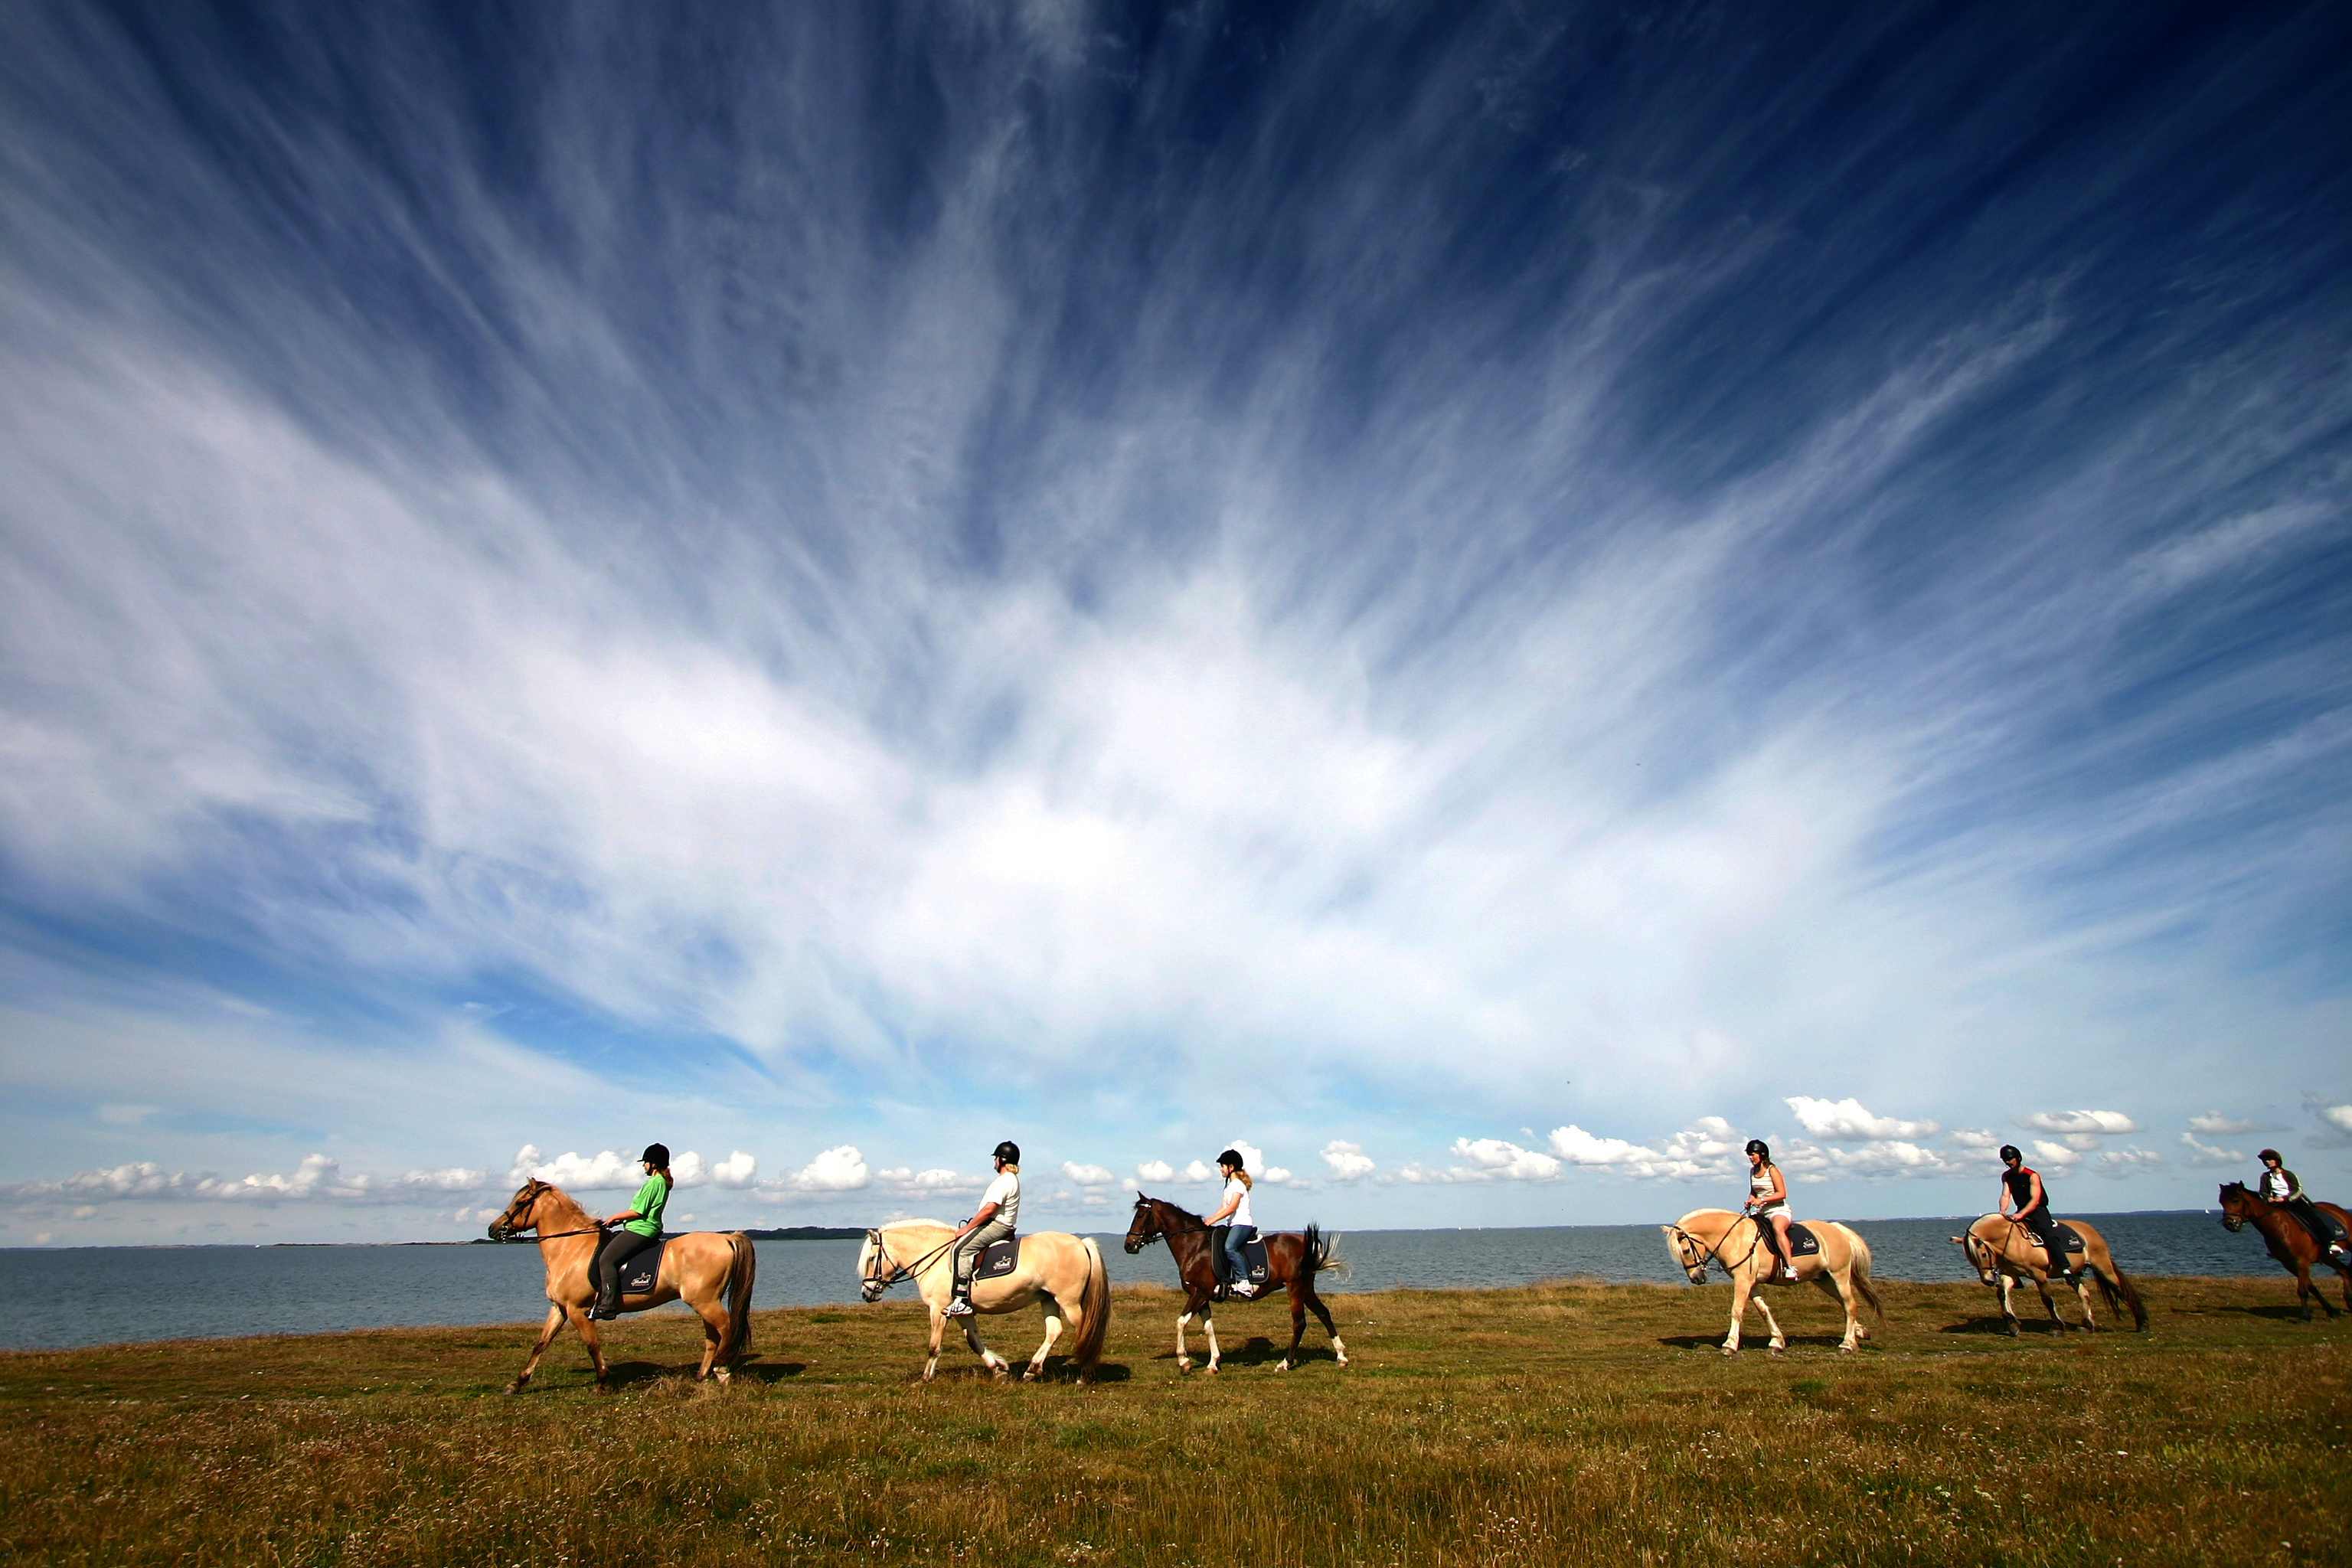 Riding a horse through the Icelandic country side is an experience that will leave memories to last a lifetime.